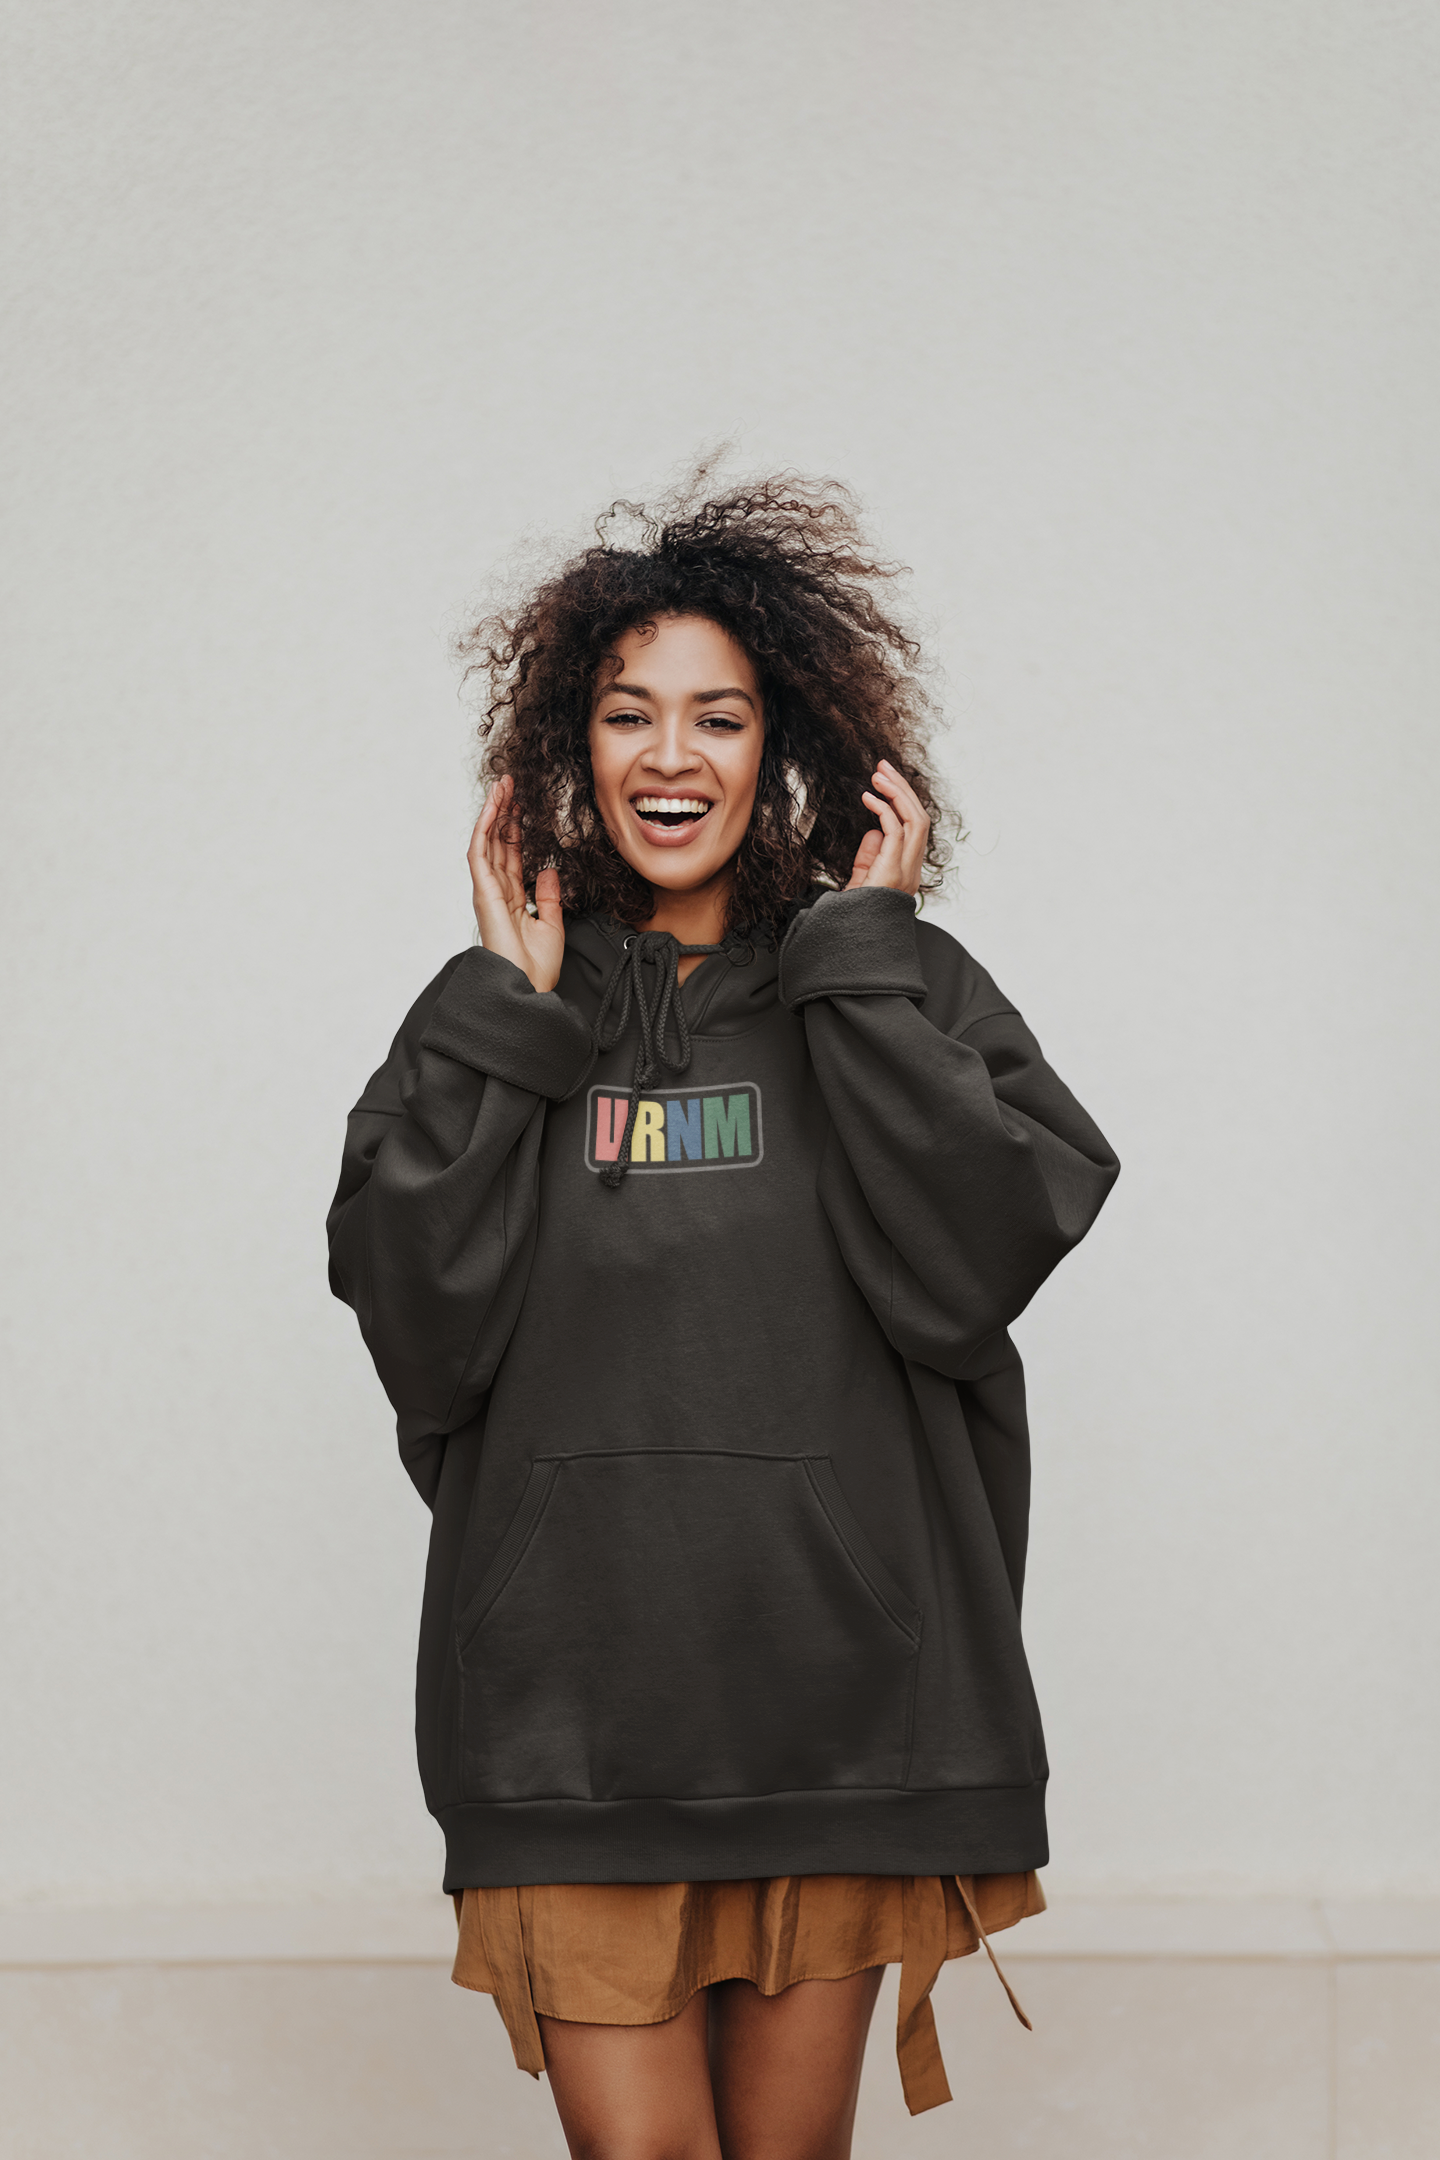 oversized-hoodie-mockup-featuring-a-woman-listening-to-music-m11827-r-el2.png